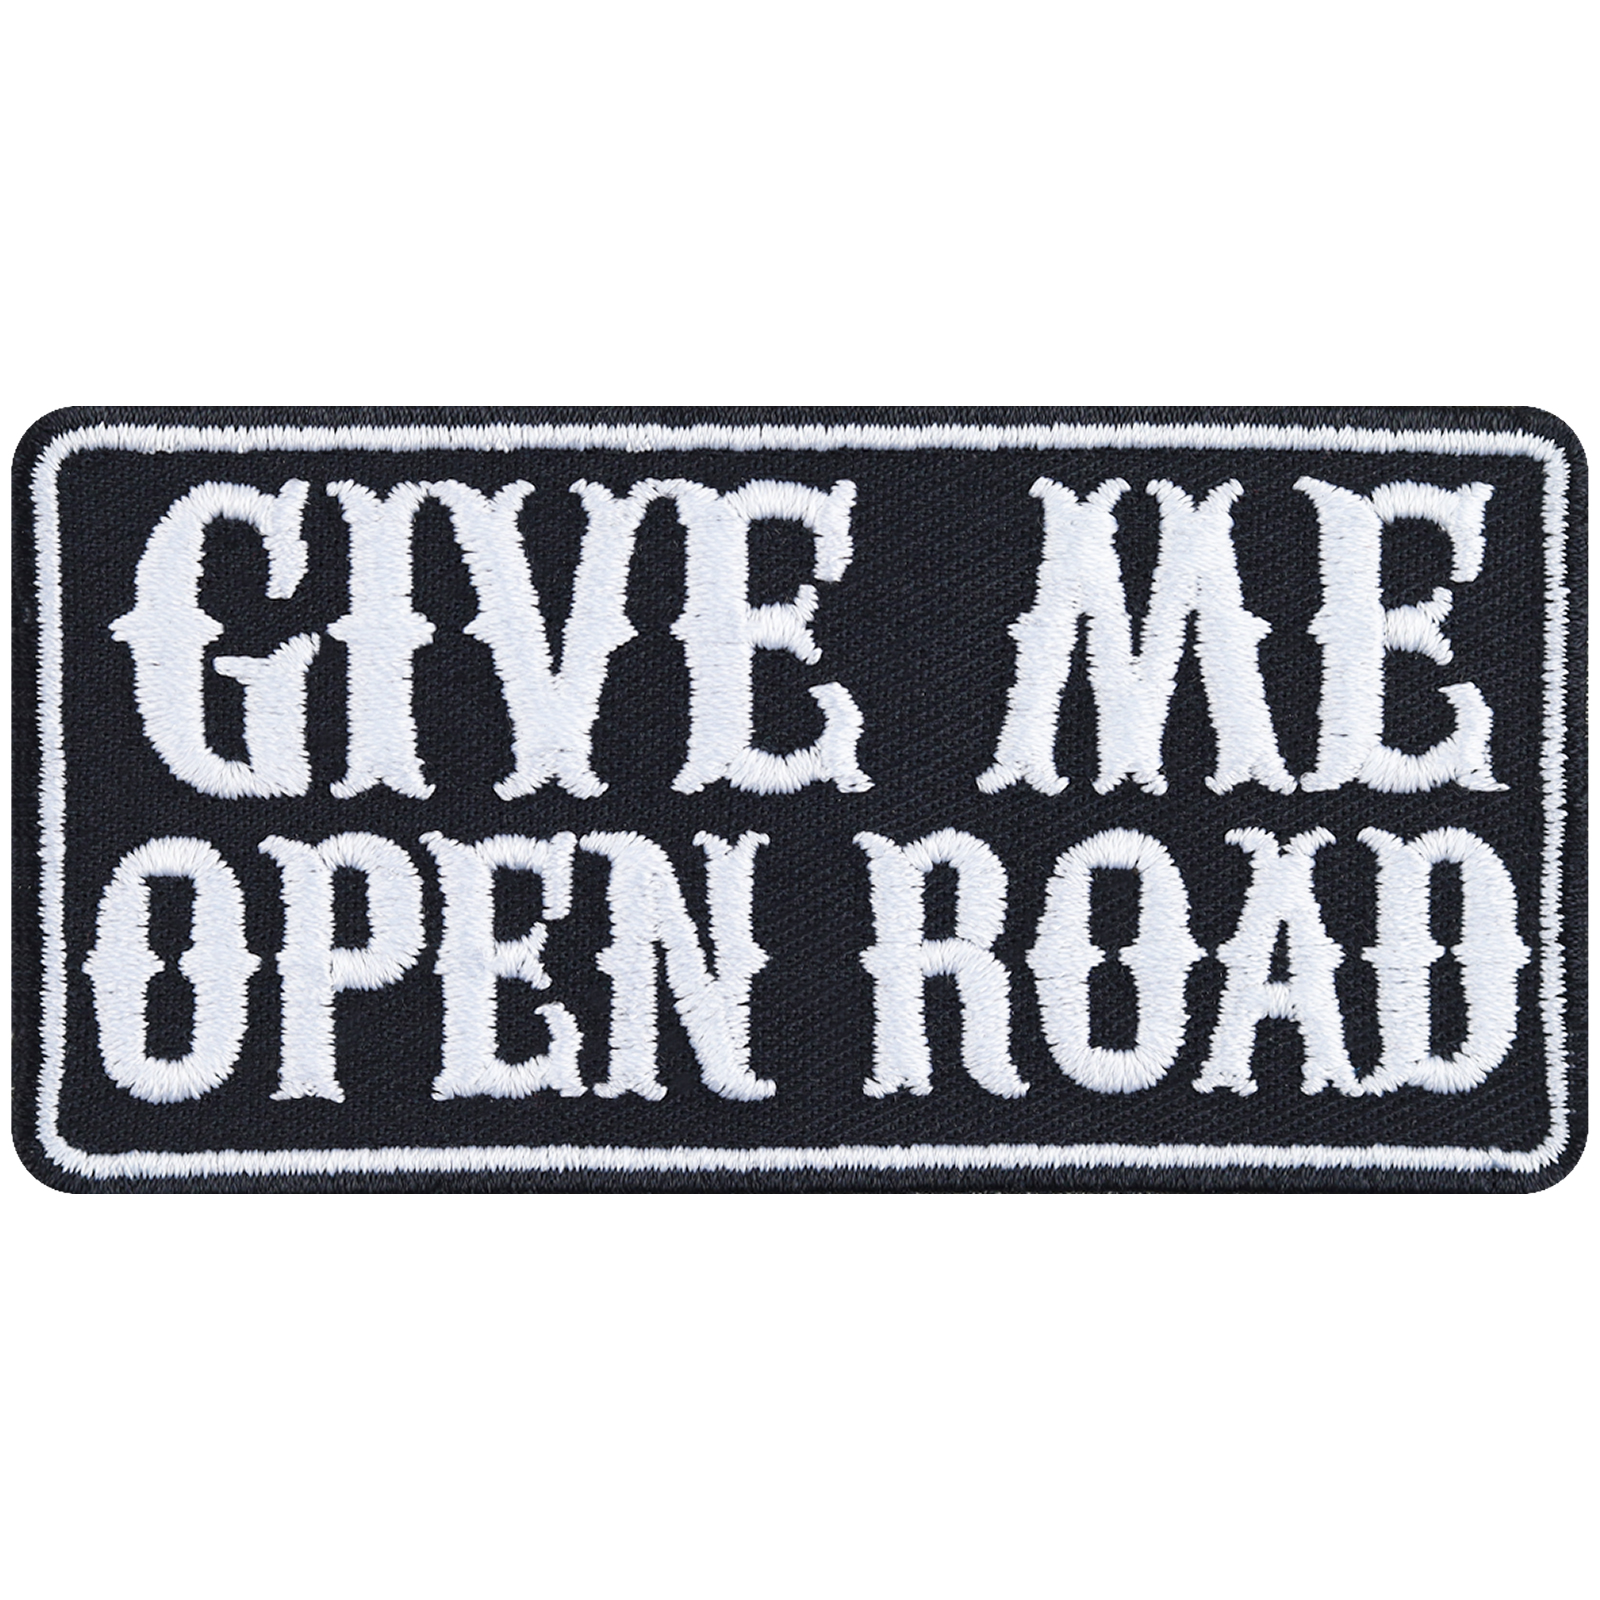 Give me open road - Patch